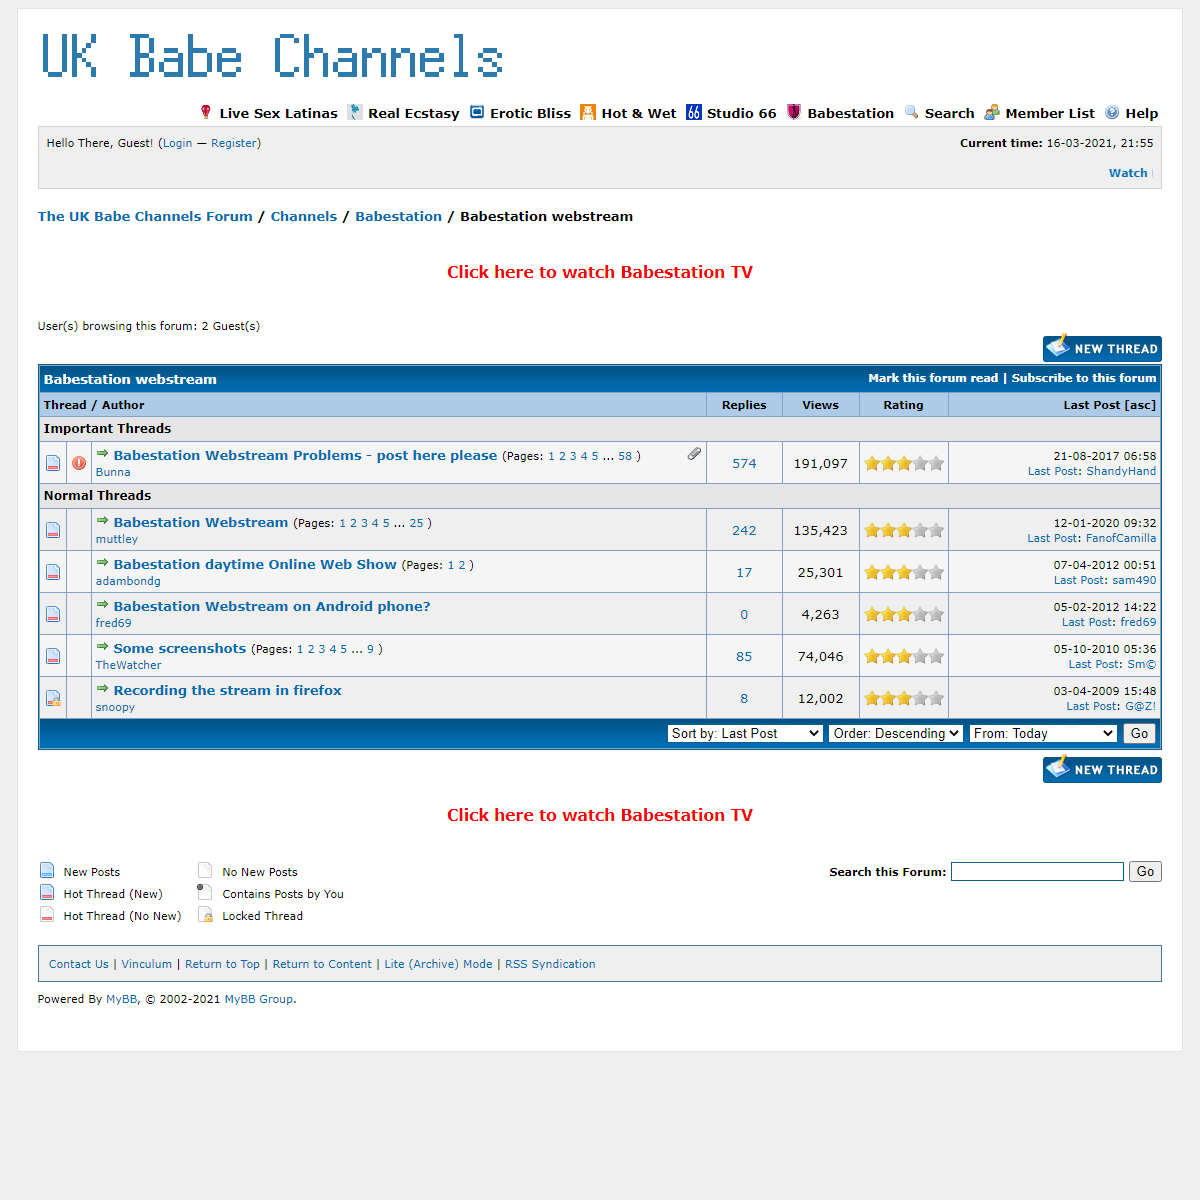 A complete backup of https://www.babeshows.co.uk/forumdisplay.php?fid=124